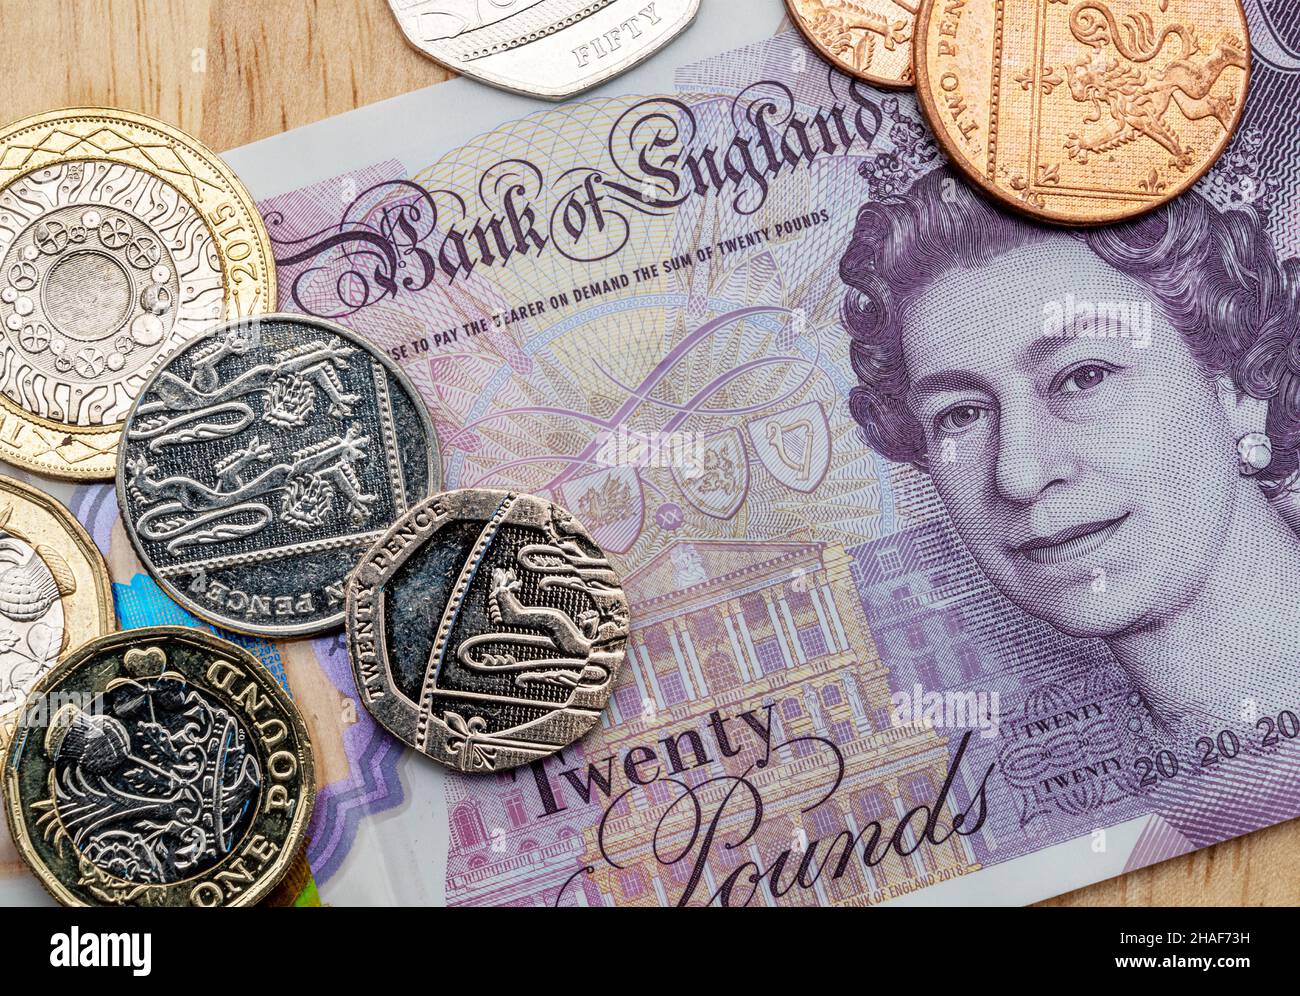 Bank of England twenty pound note with some British coins. Stock Photo